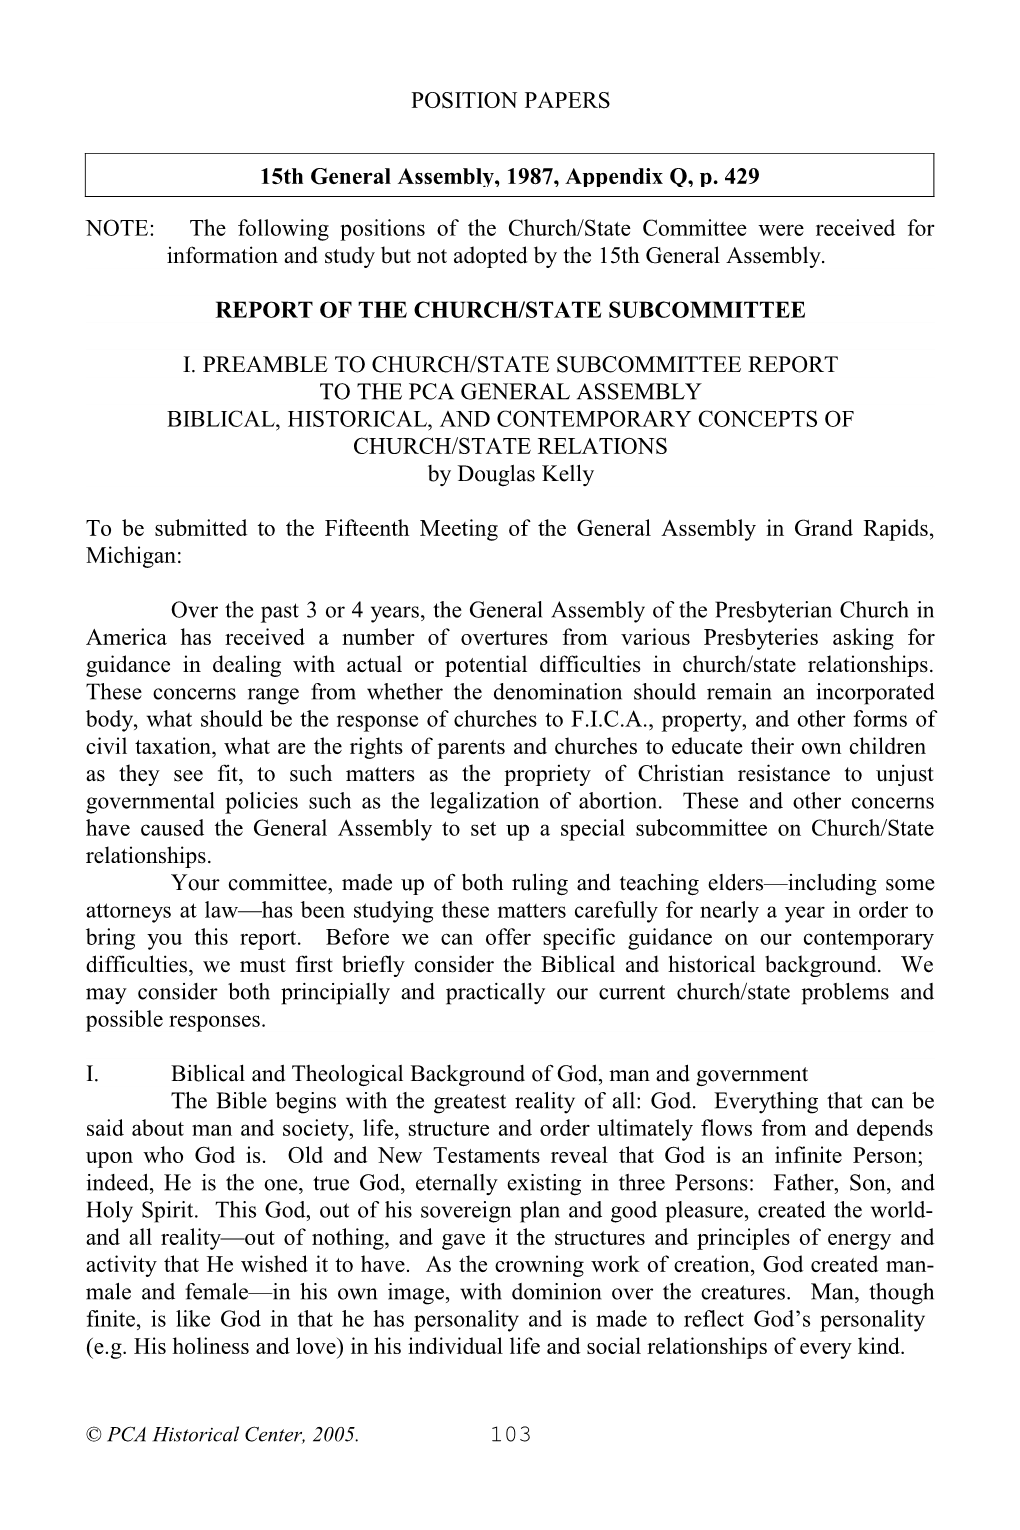 Report of the Church/State Subcommittee